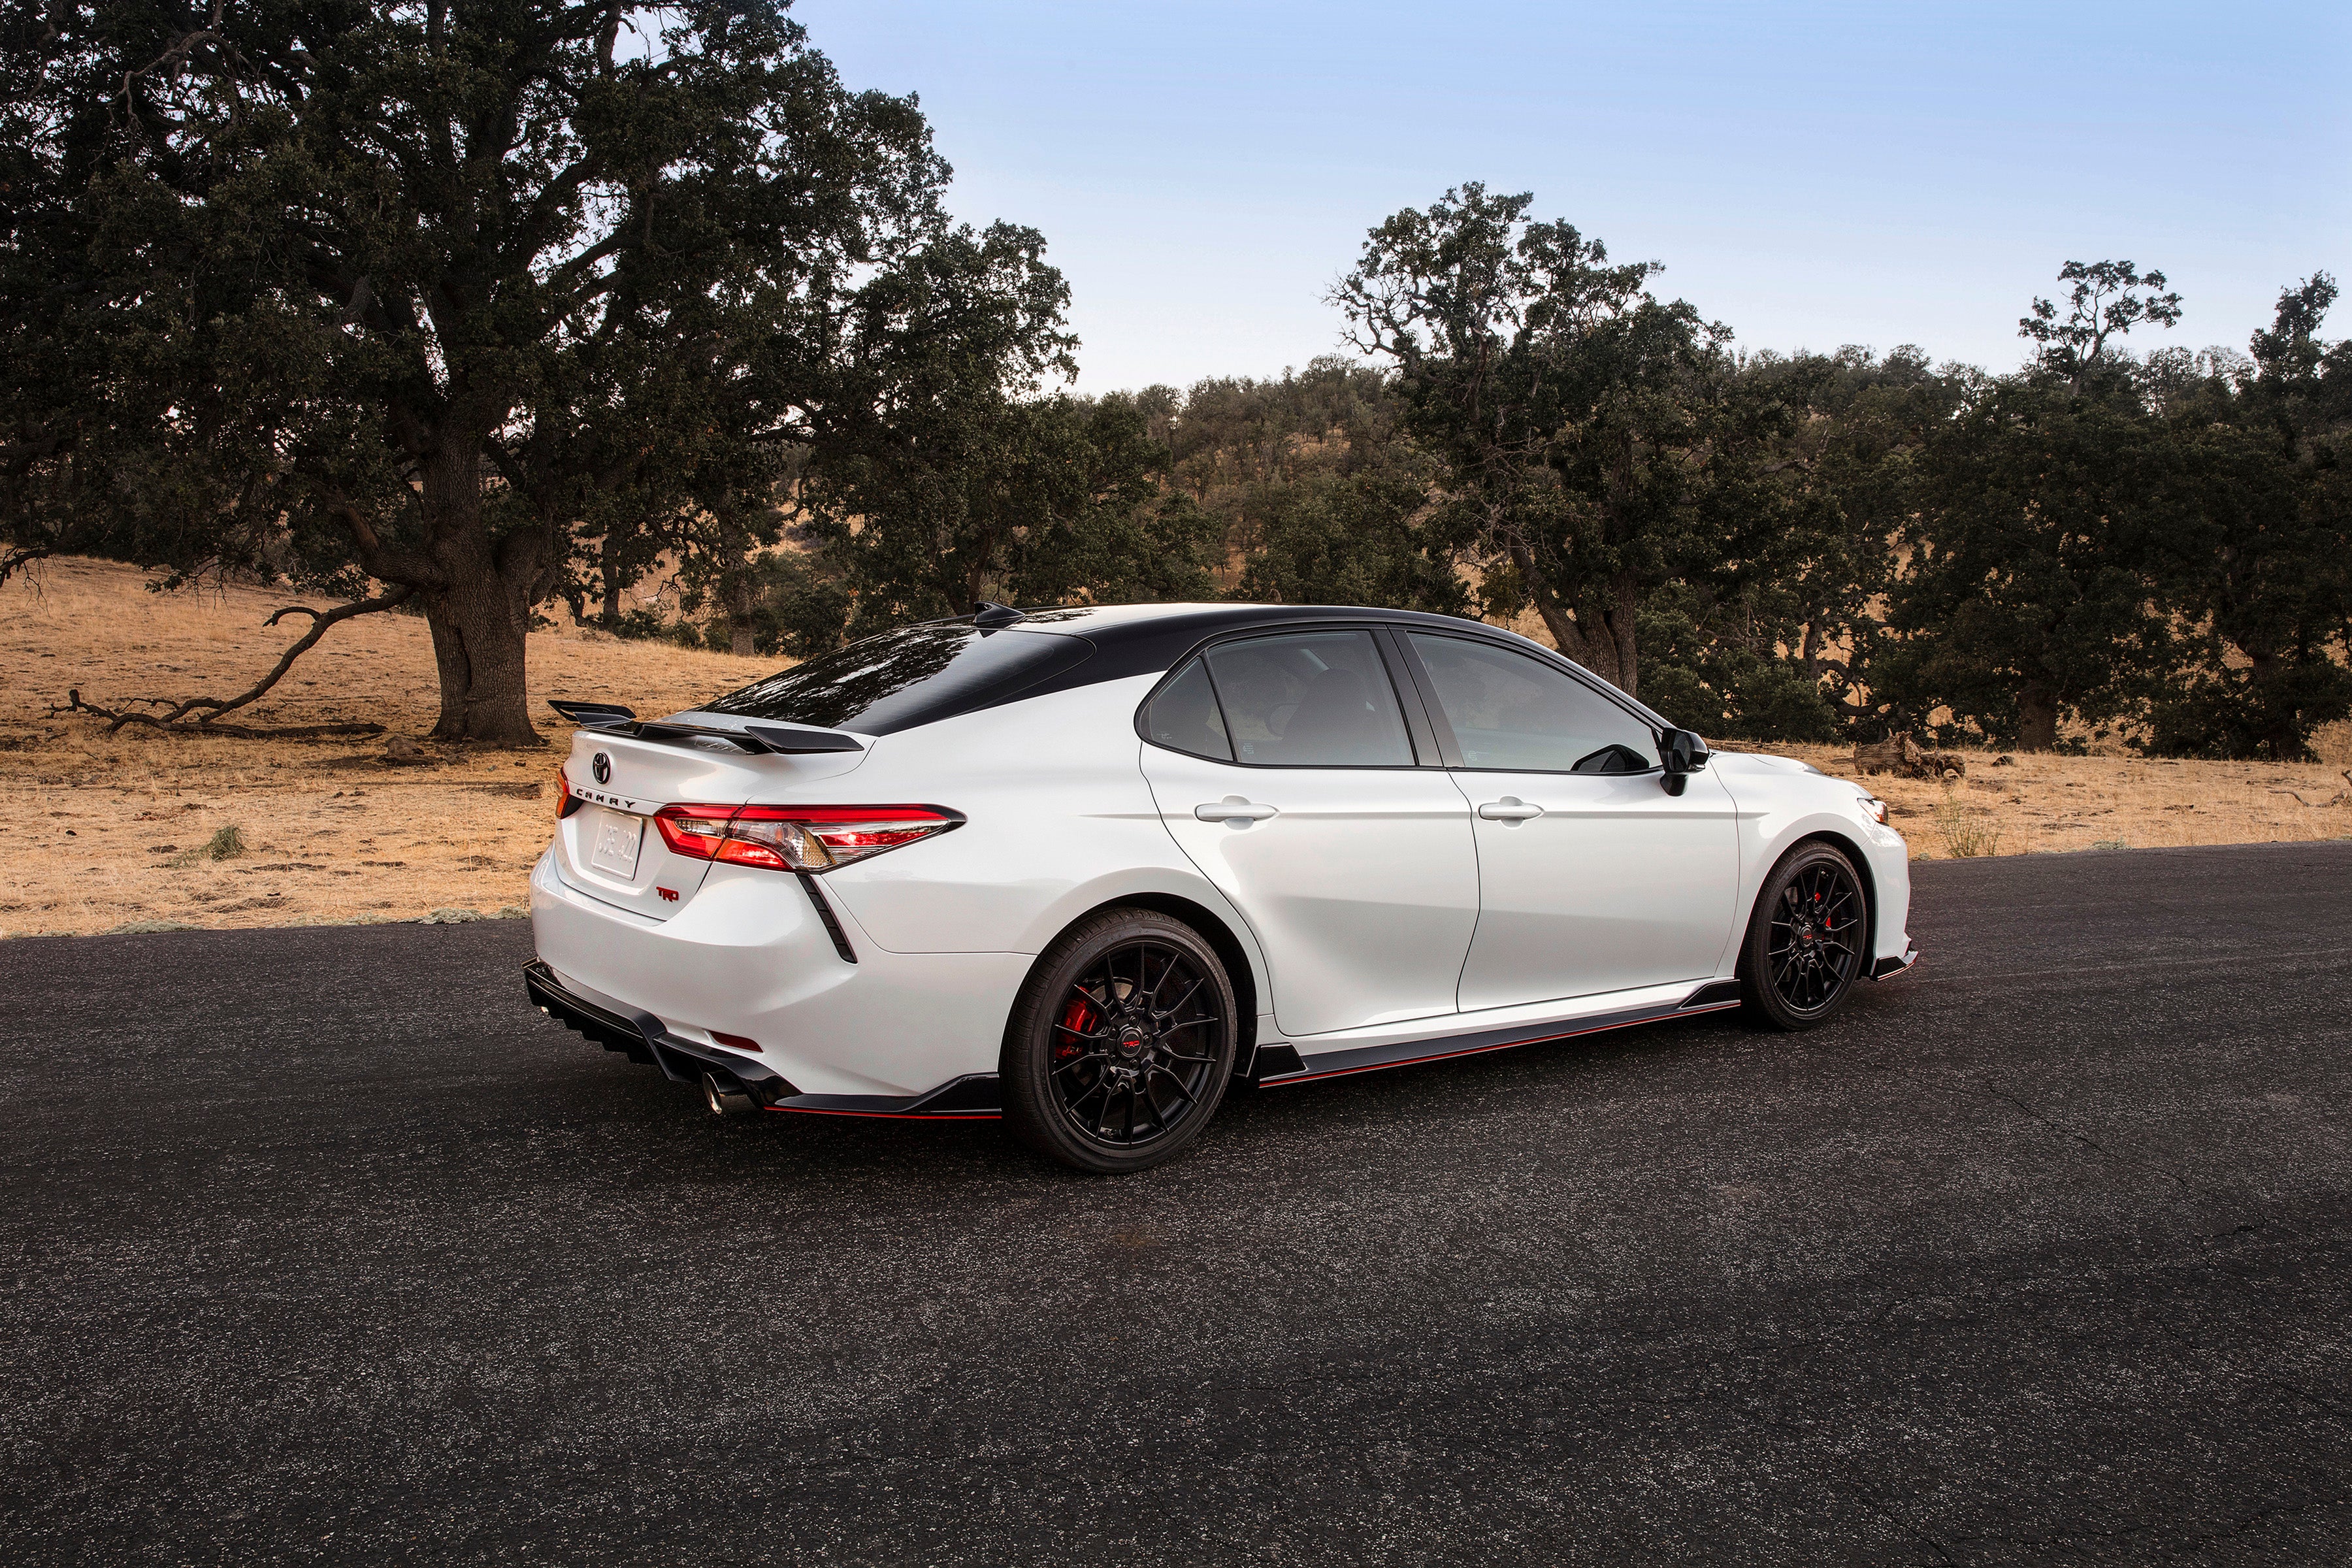 All New 2020 Toyota Camry TRD stance - Falmouth Toyota of Bourne, MA - Serving Cape Cod, Hyannis, Plymouth MA